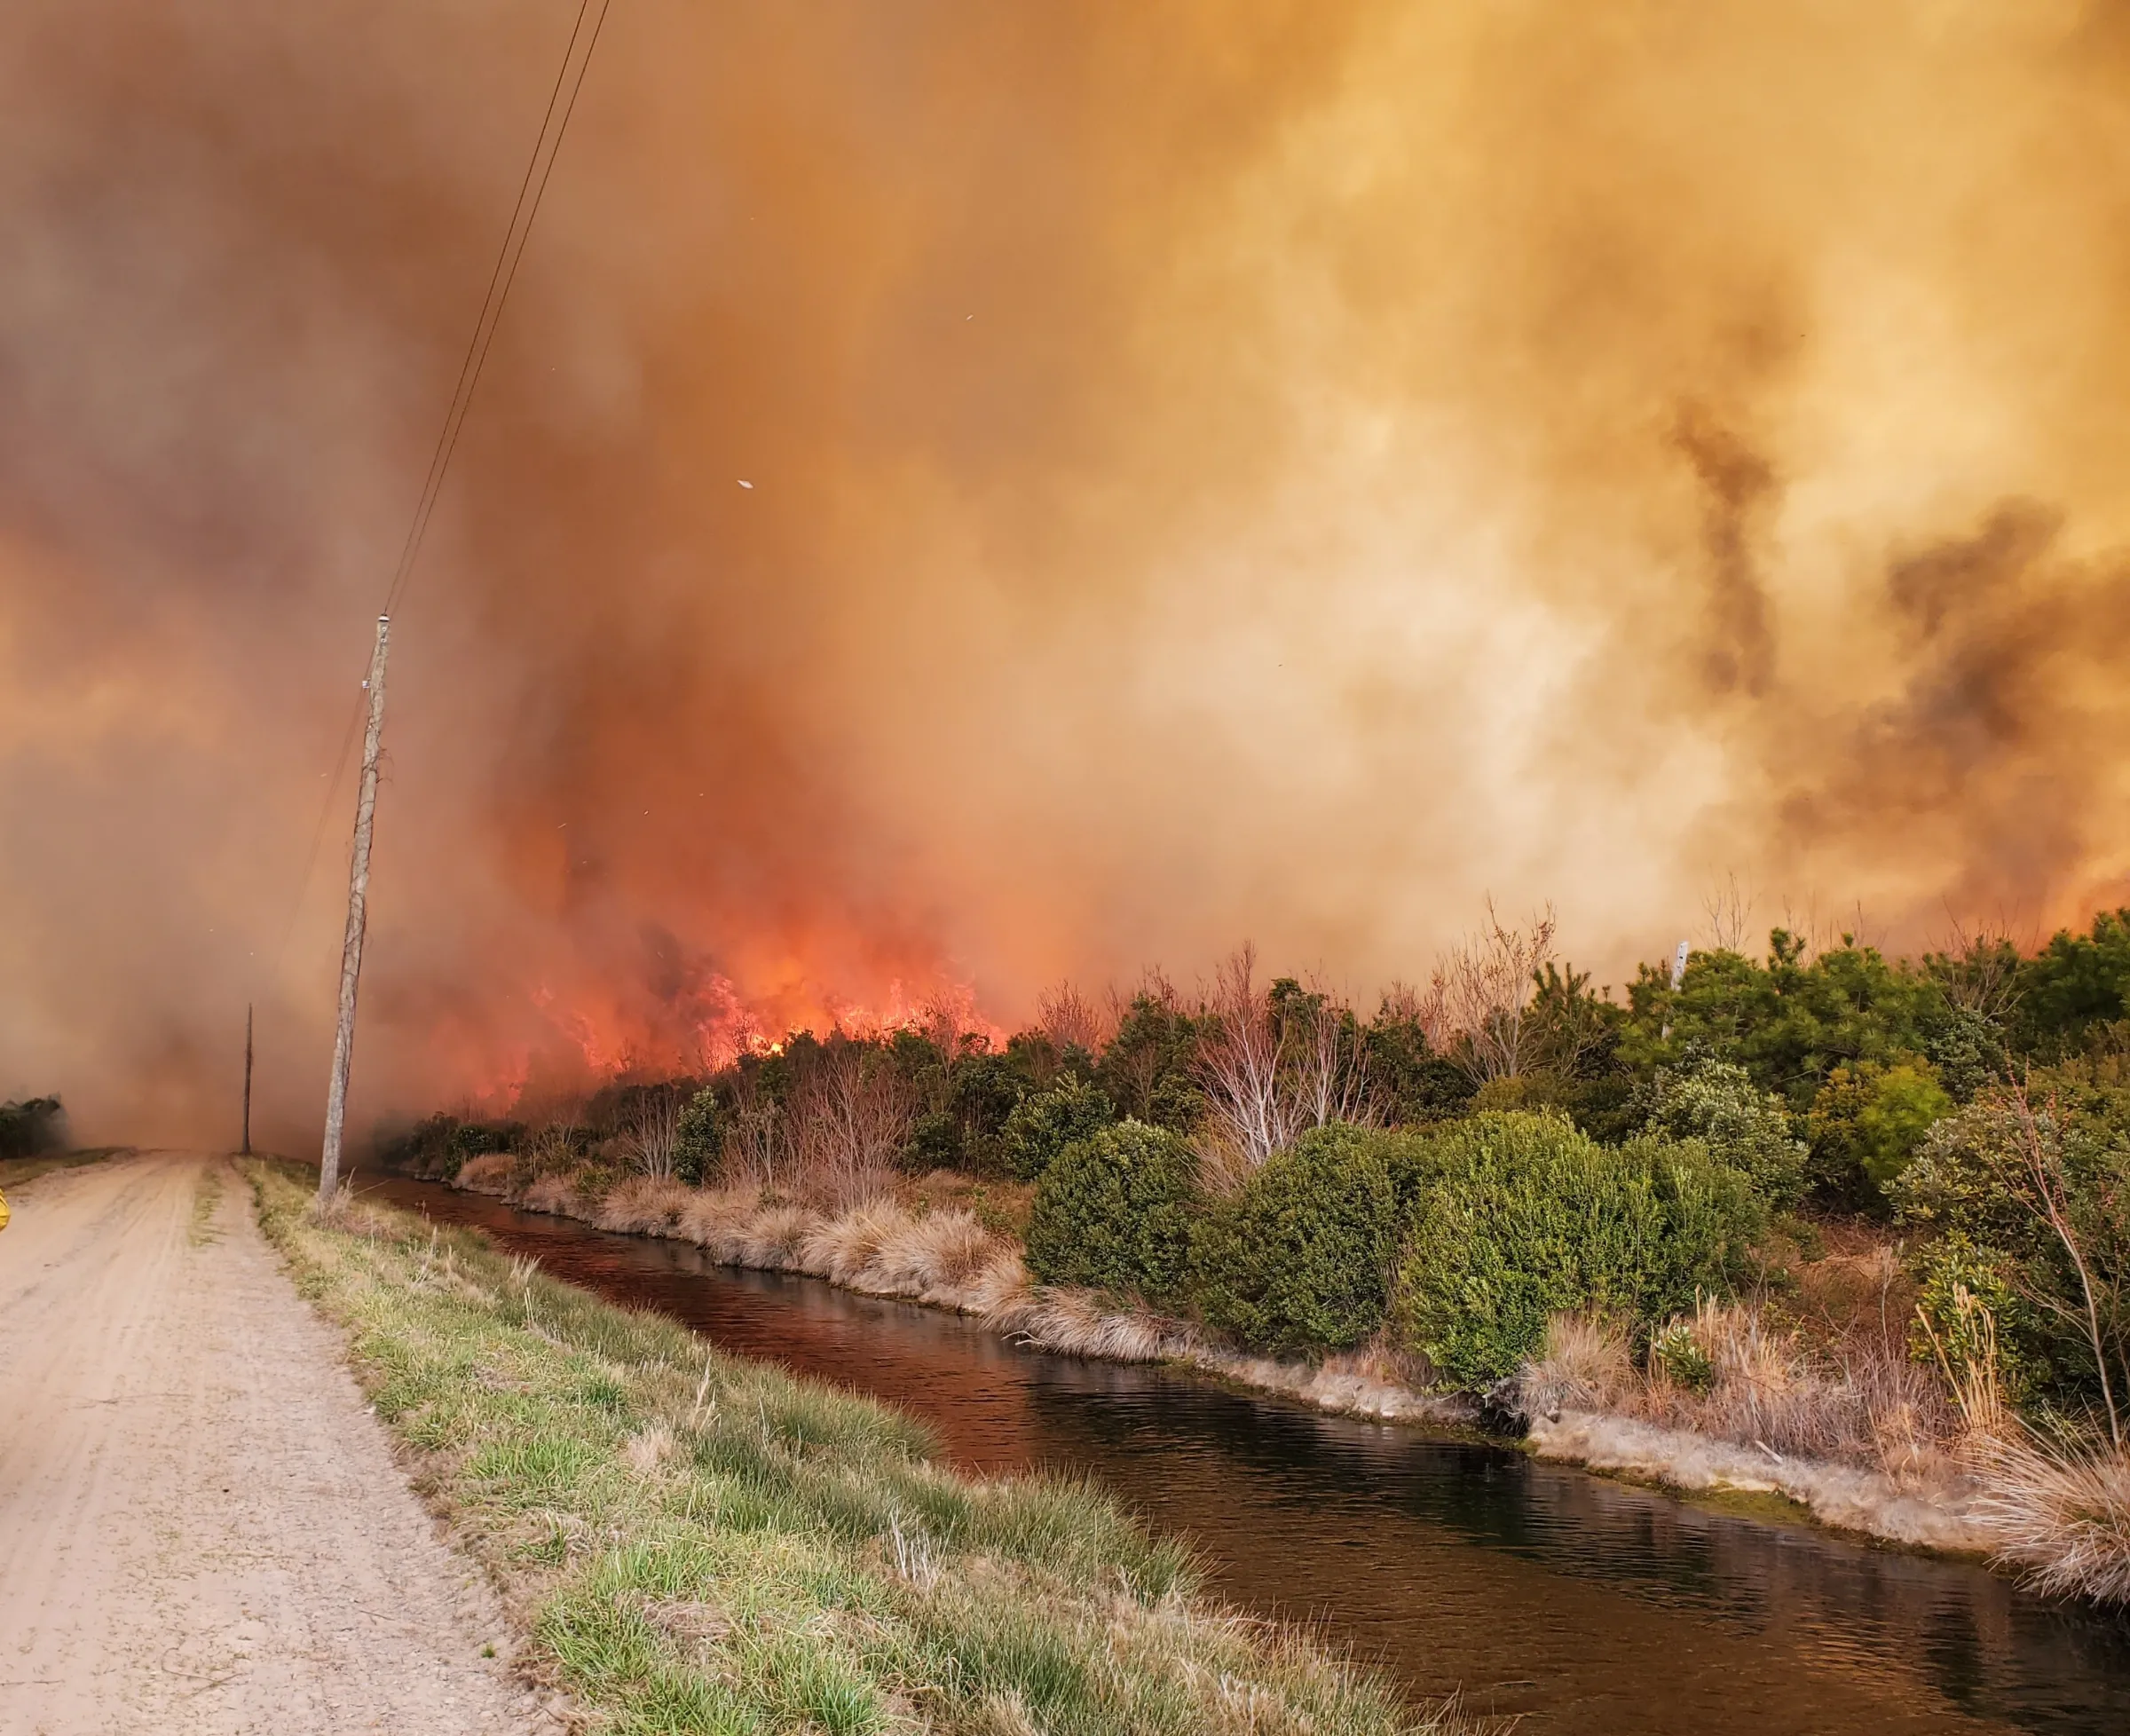 The Jackson Road Fire, which originated at a military bombing range in Dare County, North Carolina, burned through more than 1,000 acres of land in March 2022